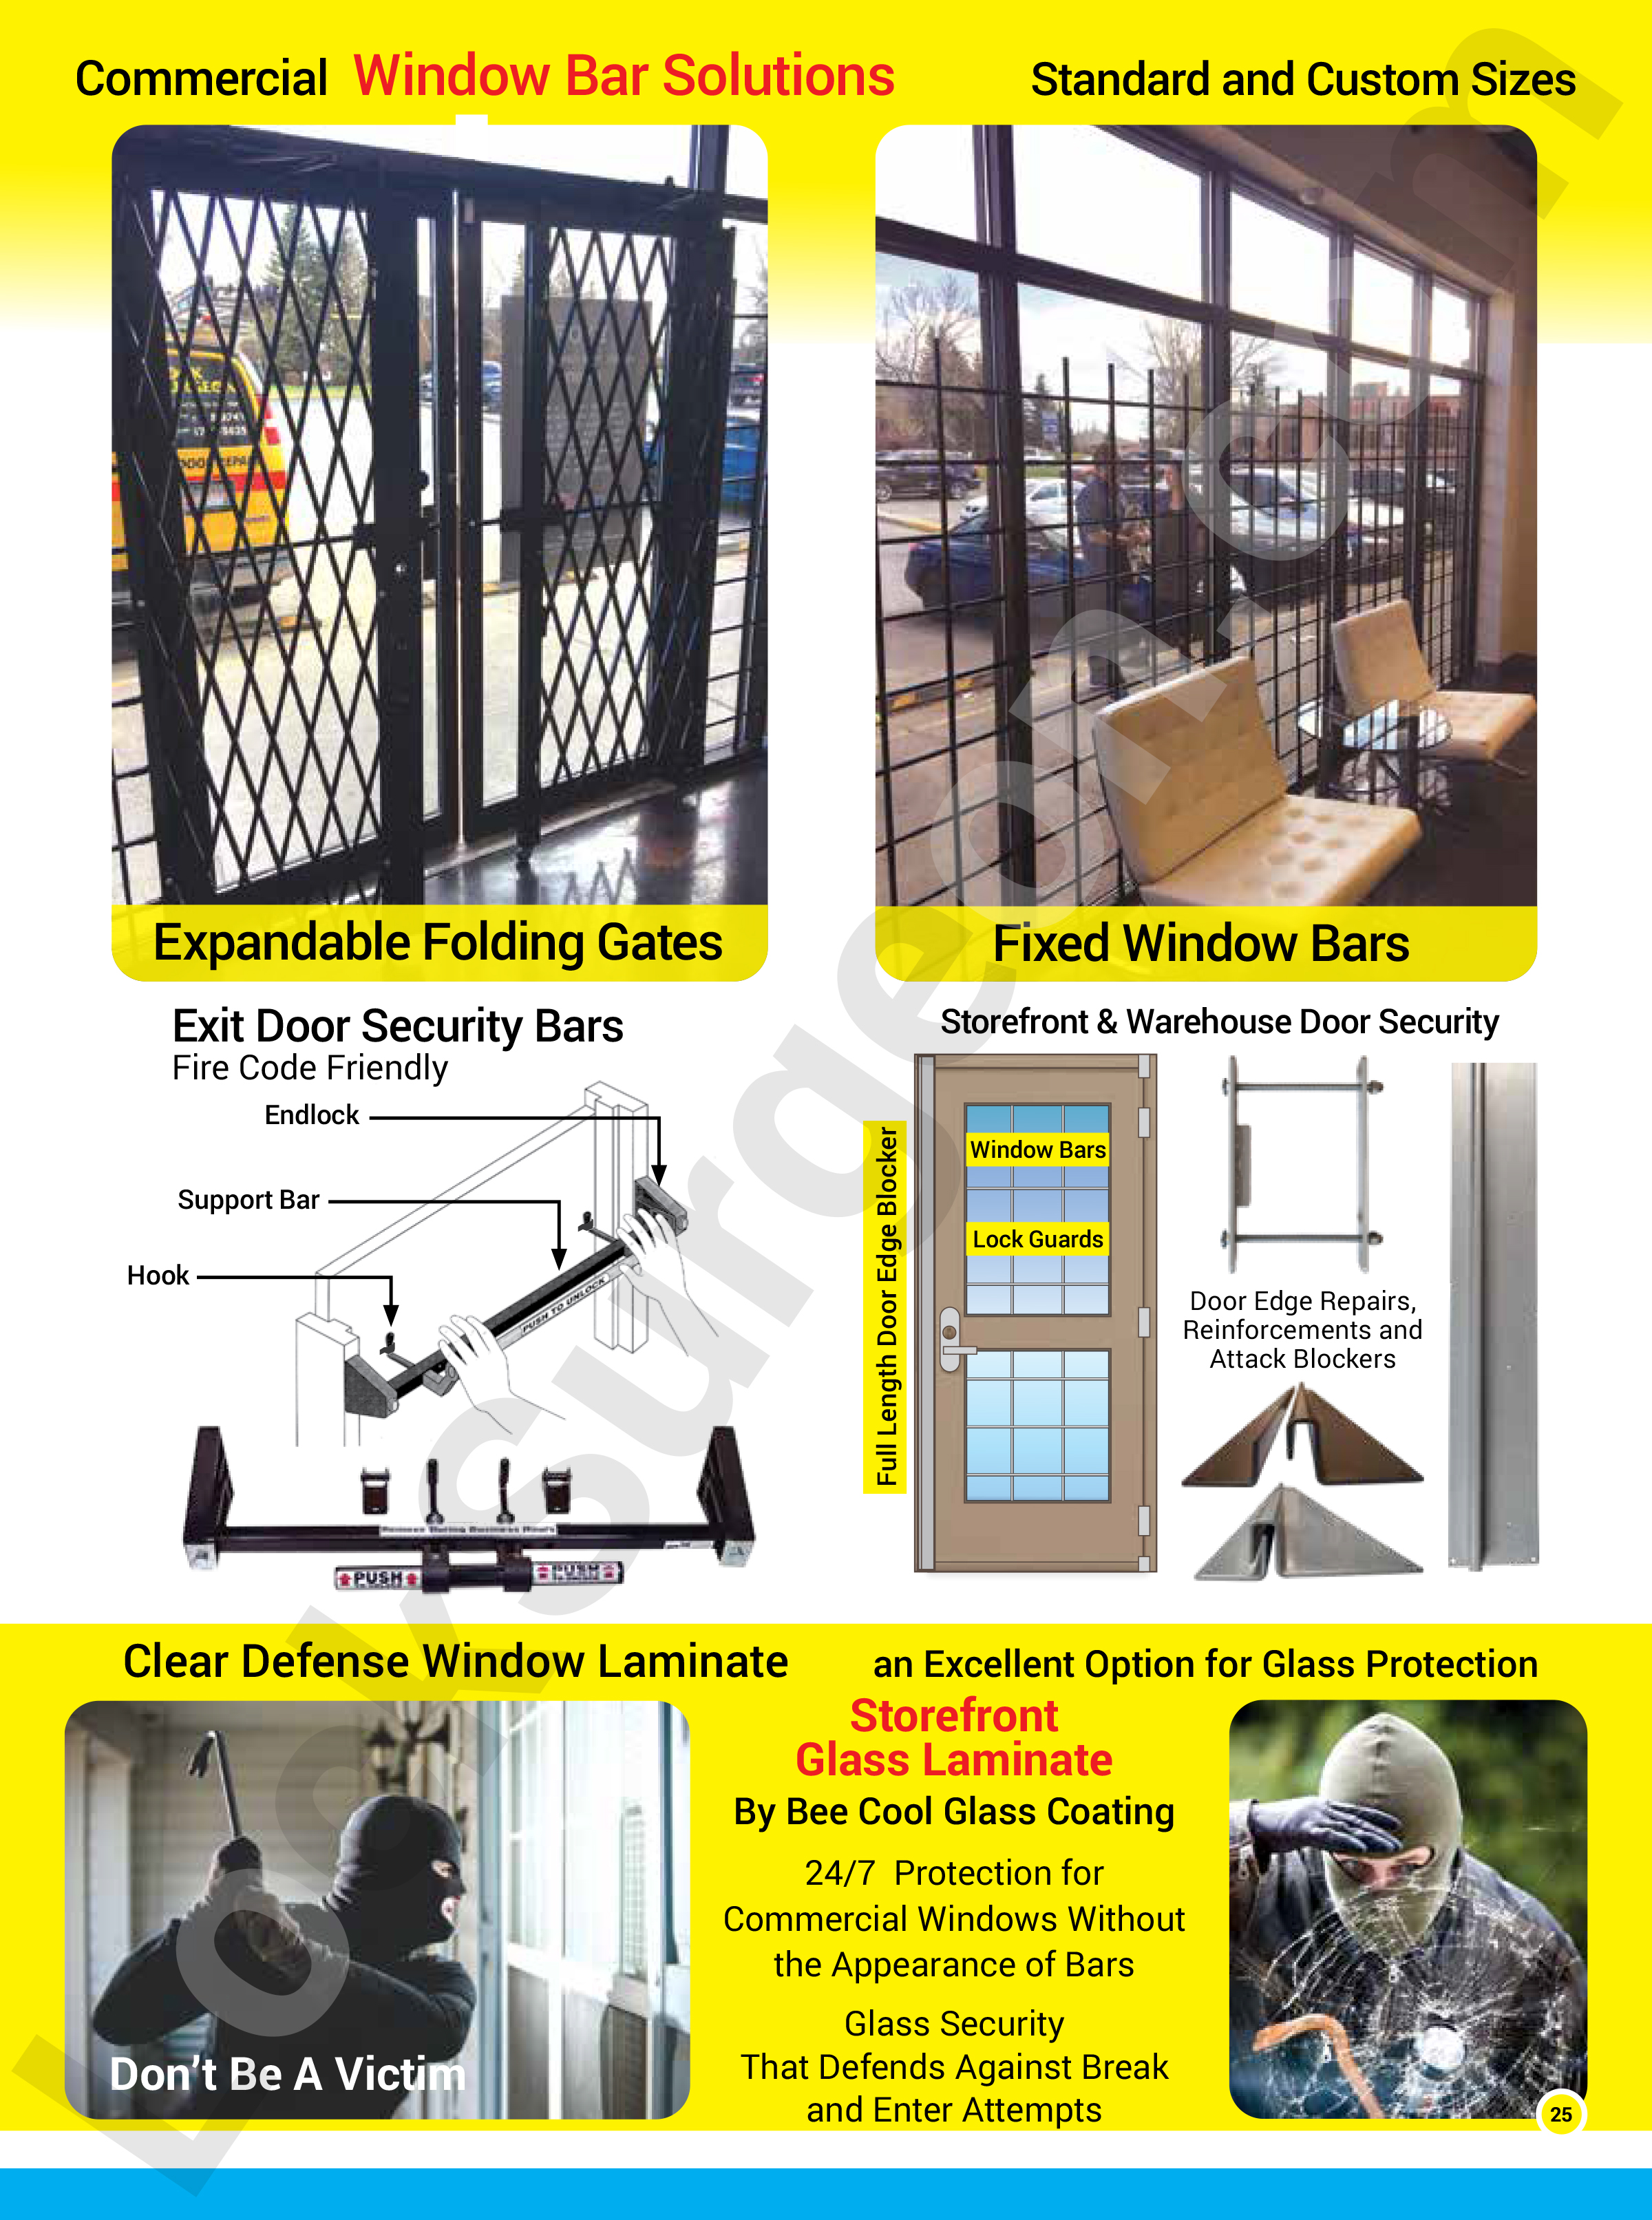 Lock Surgeon Edmonton South window bar solutions for commercial businesses sold and installed.